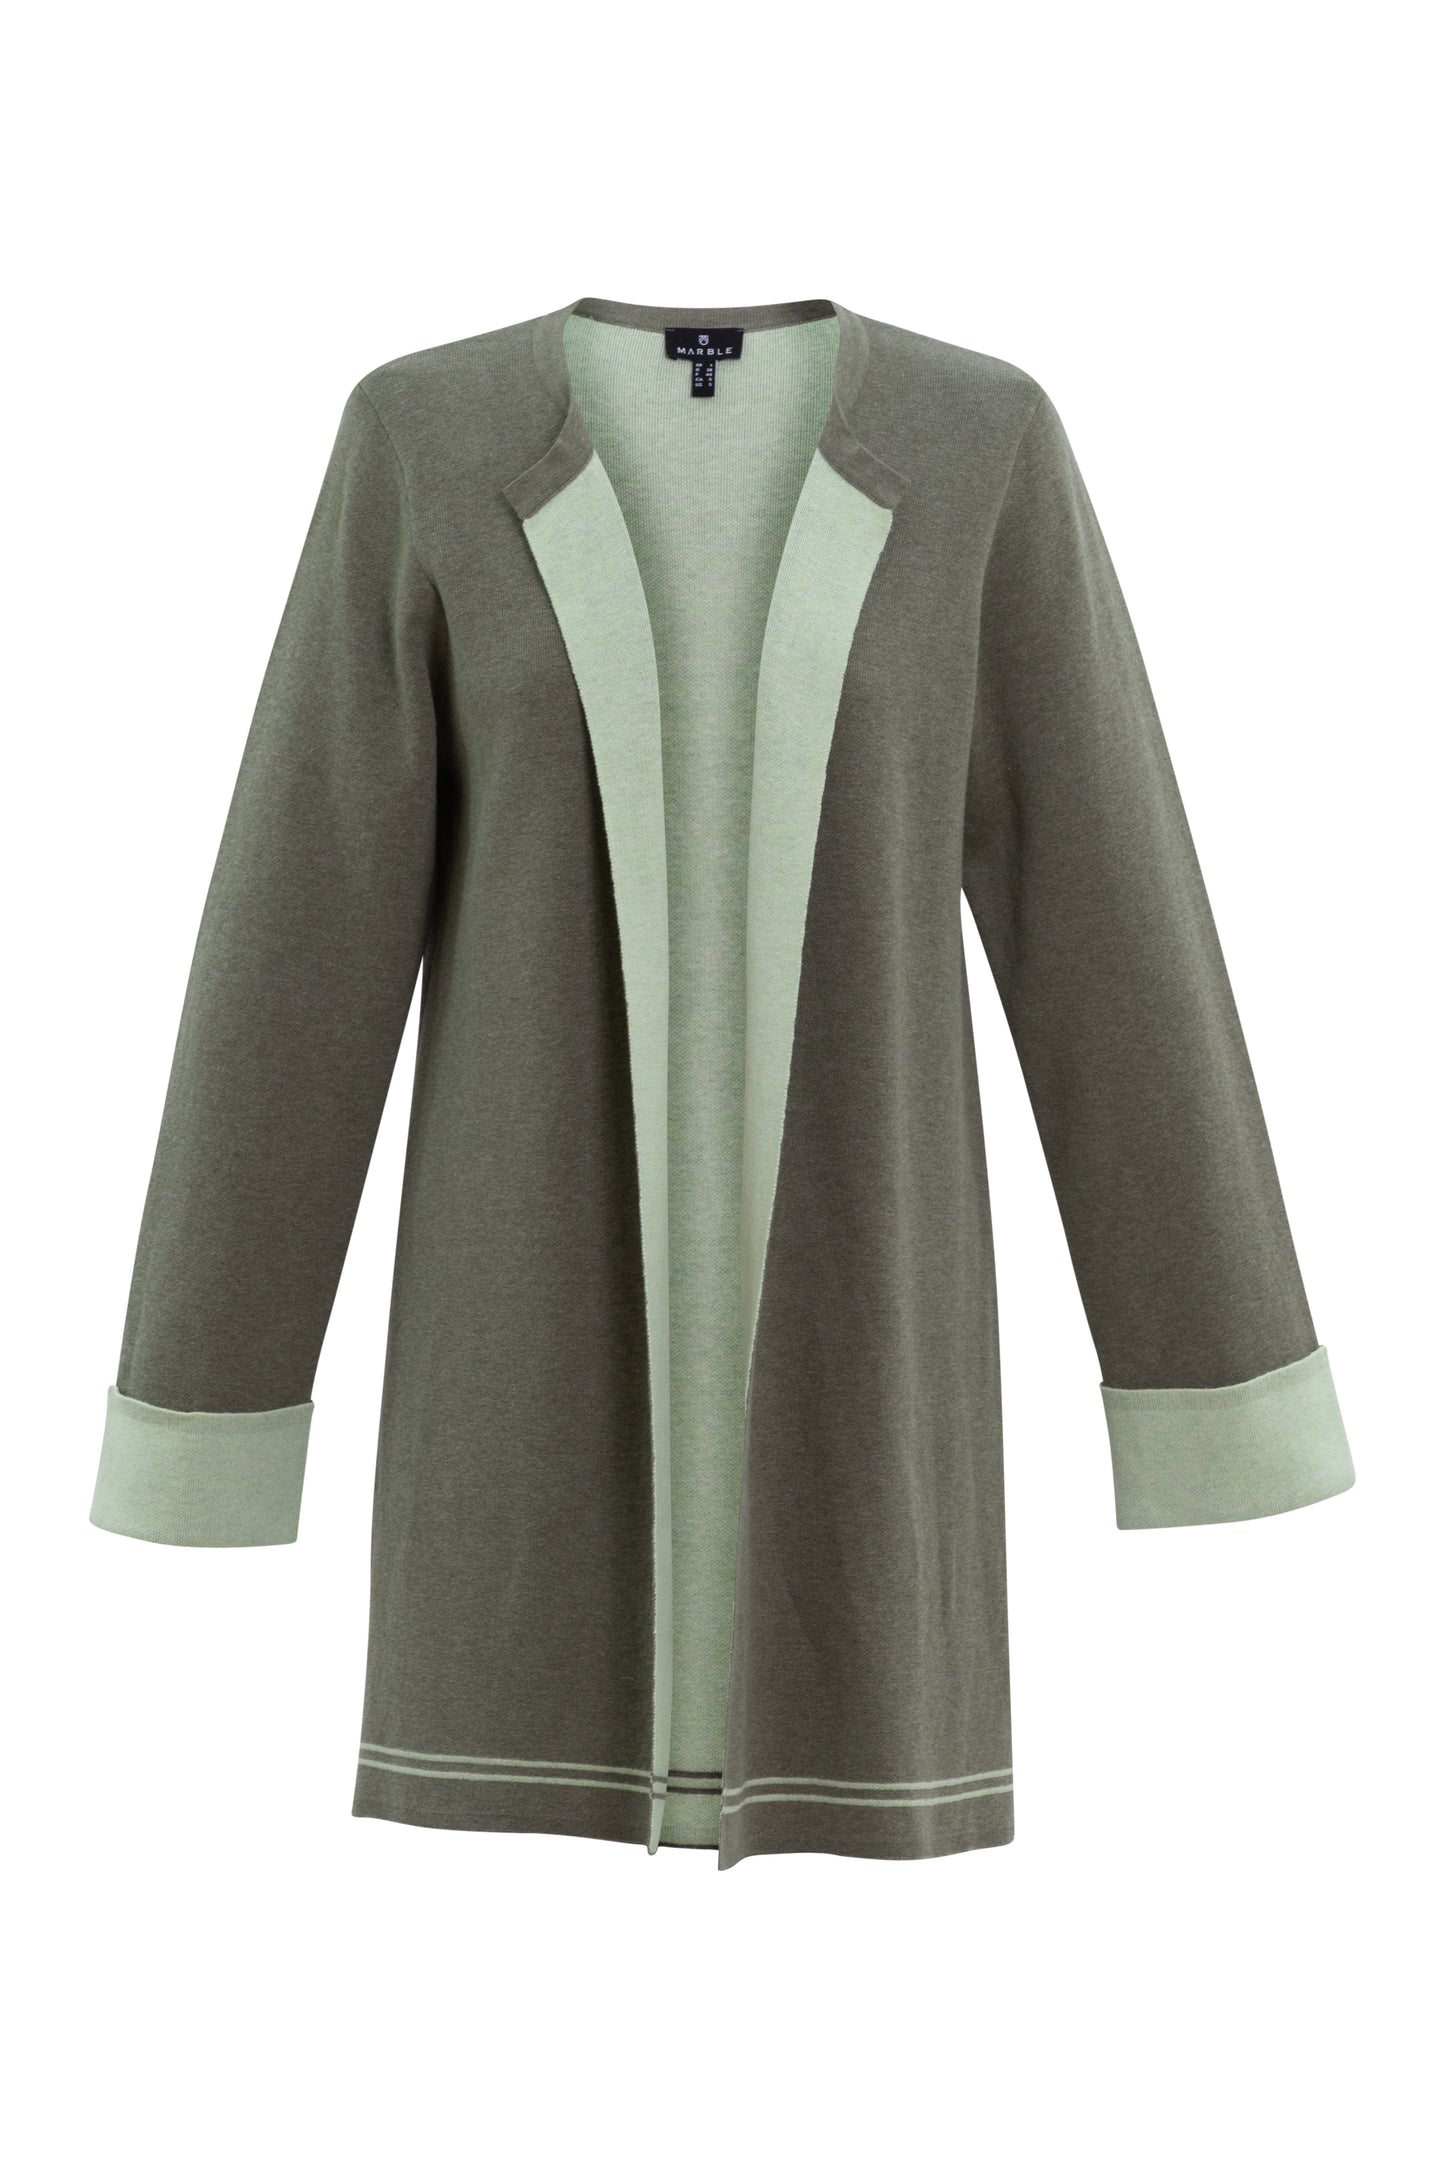 Longline Cardigan in Olive/Lime